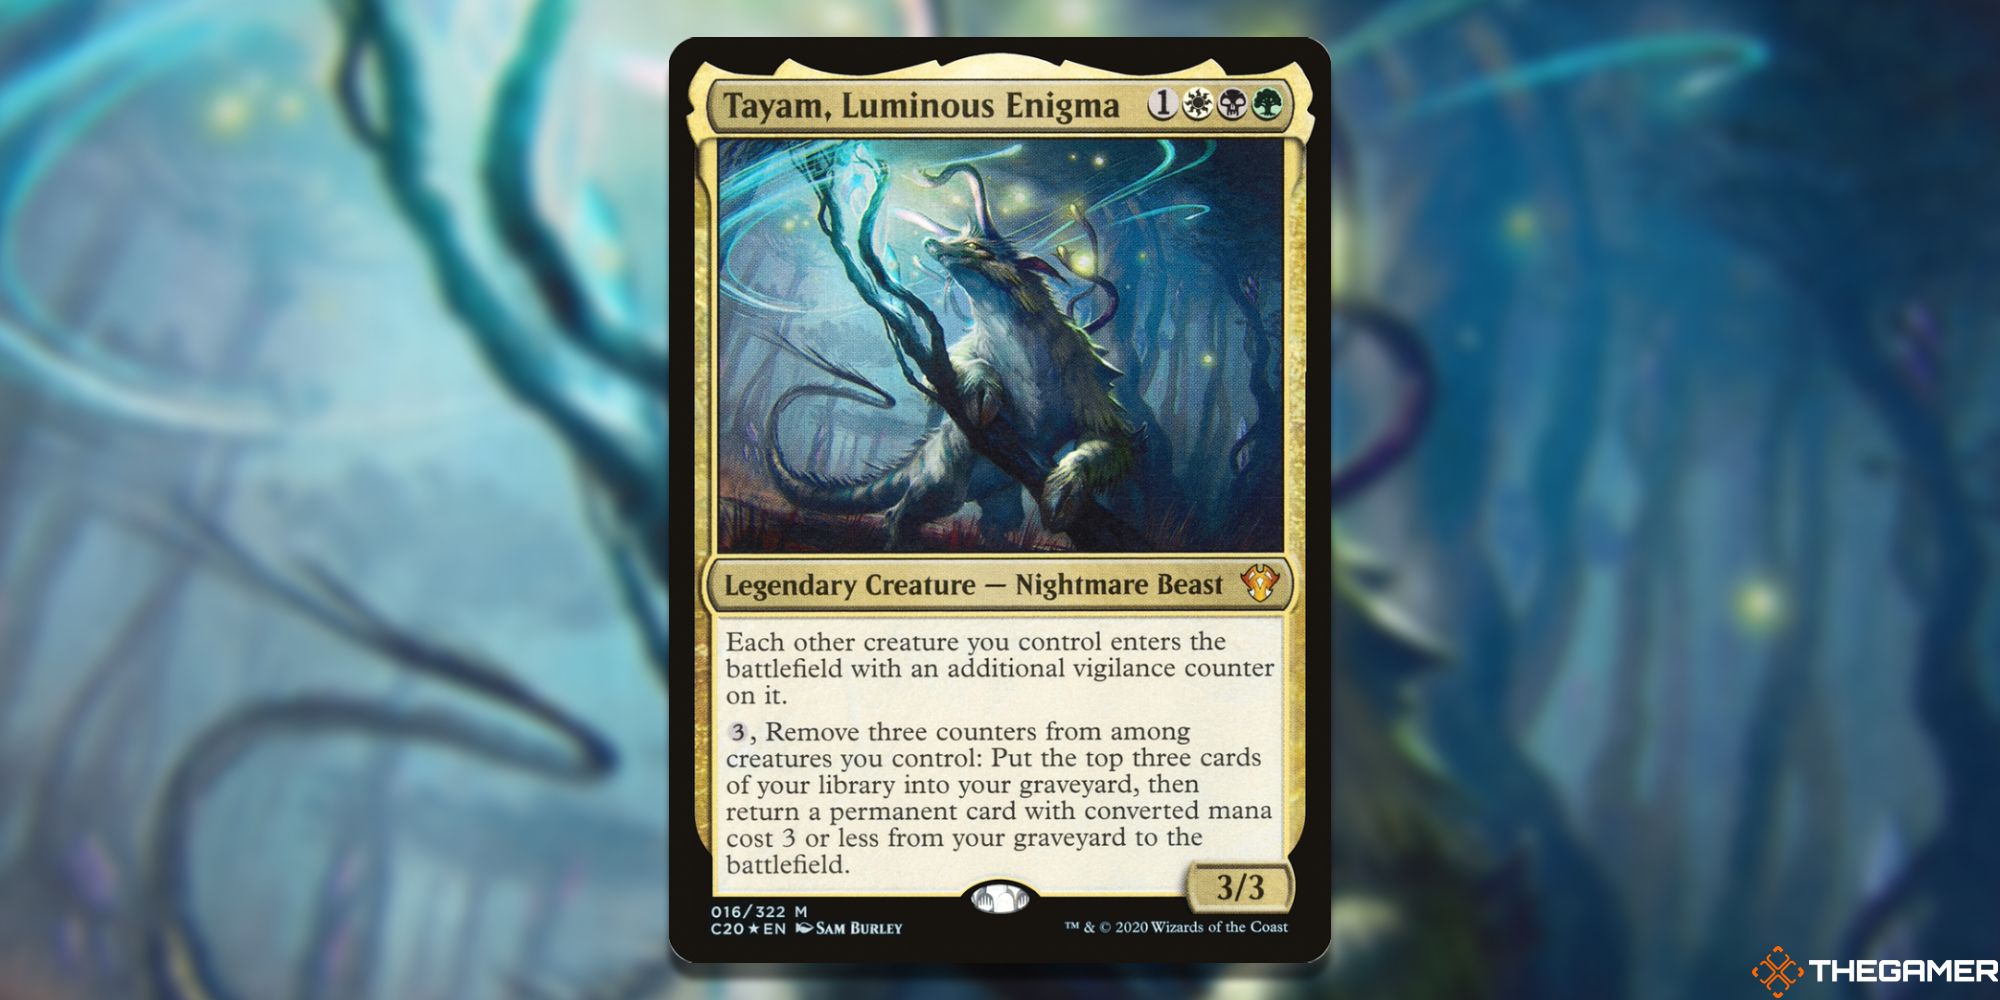 Image of the Tayam, Luminous Enigma card in Magic: The Gathering, with art by Sam Burley